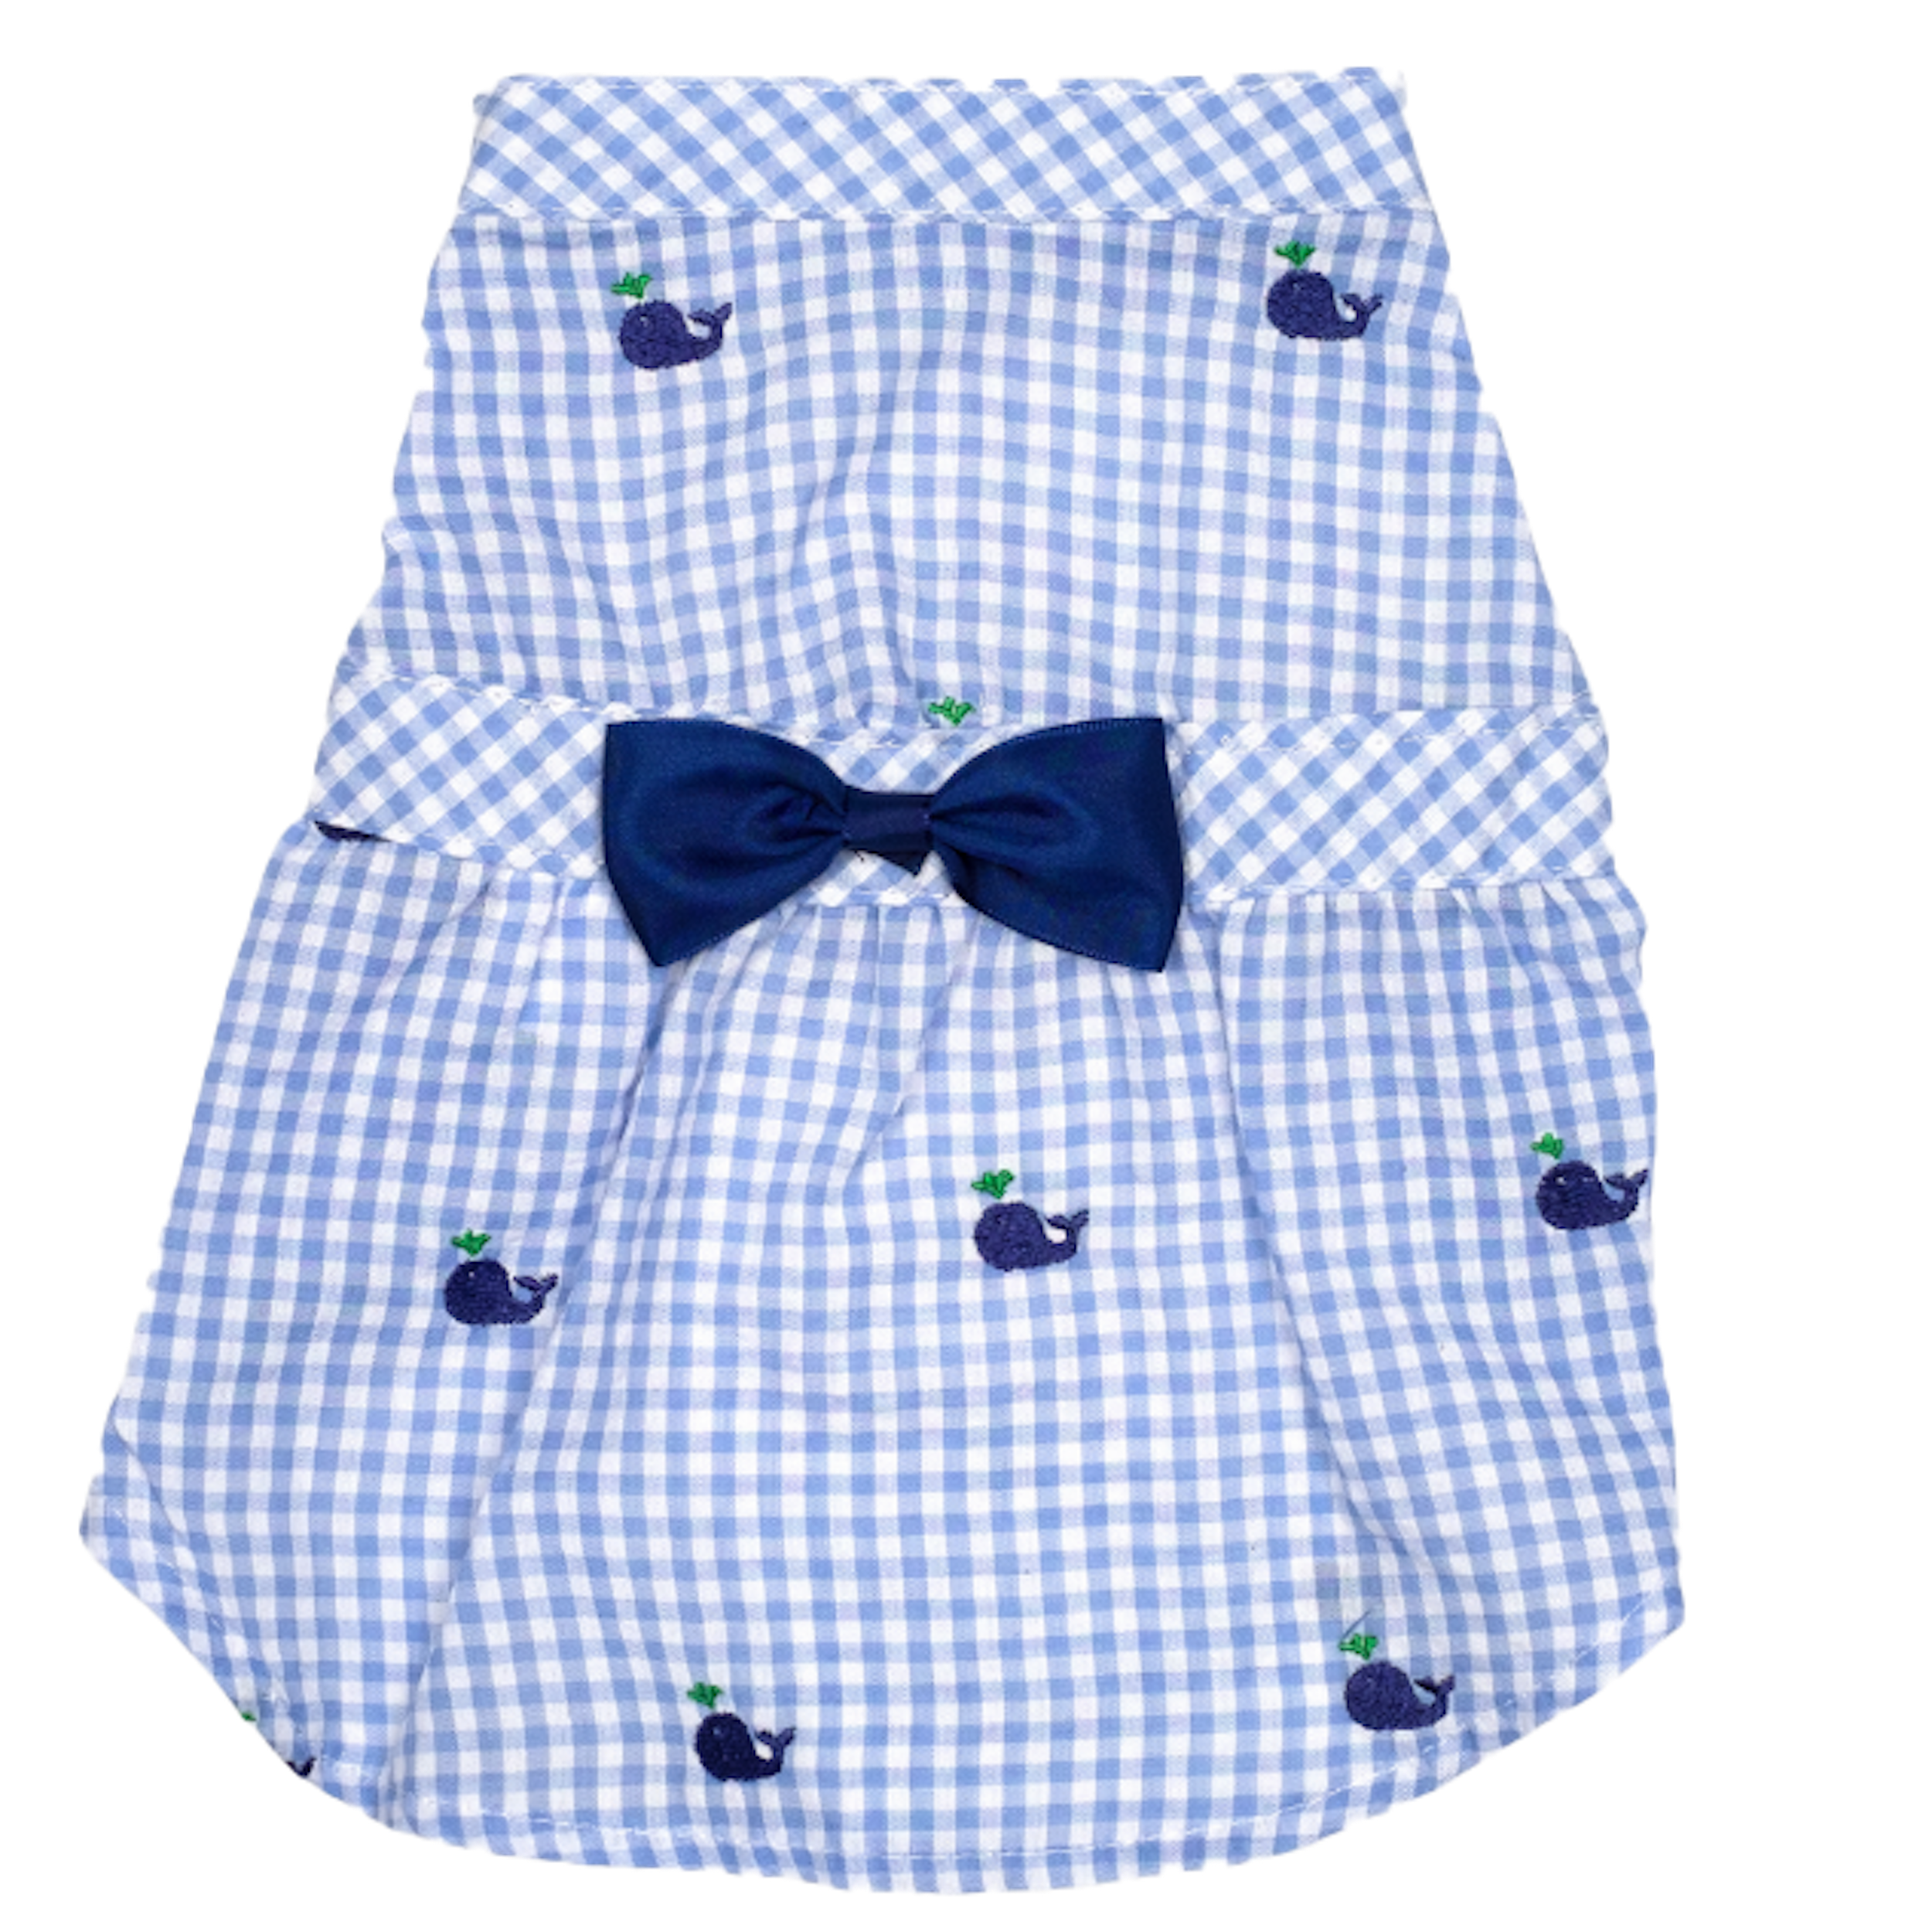 Dress | Gingham Whales